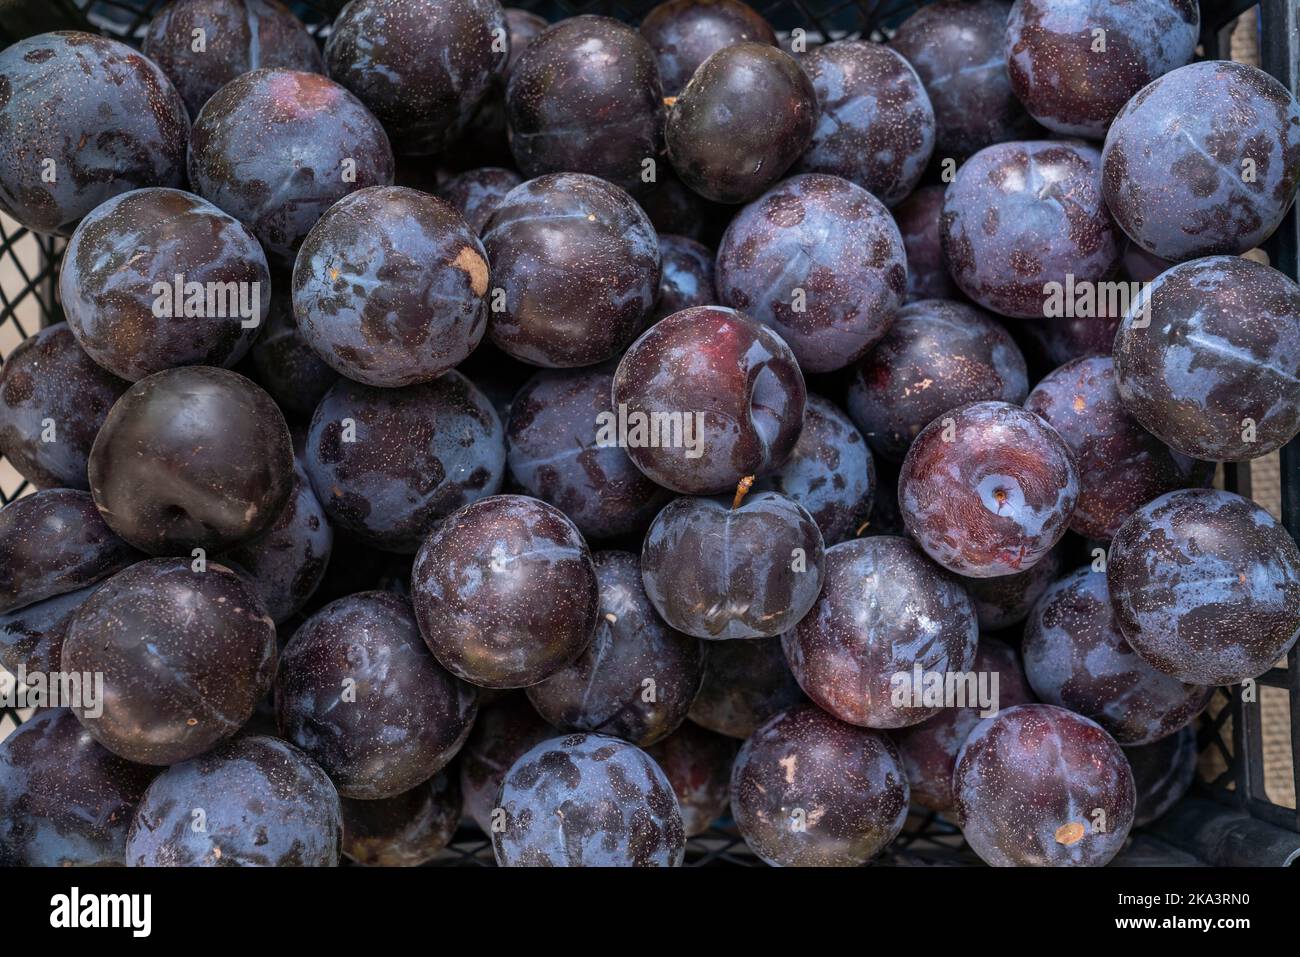 Group of Plum fruit on the grocery. Stock Photo